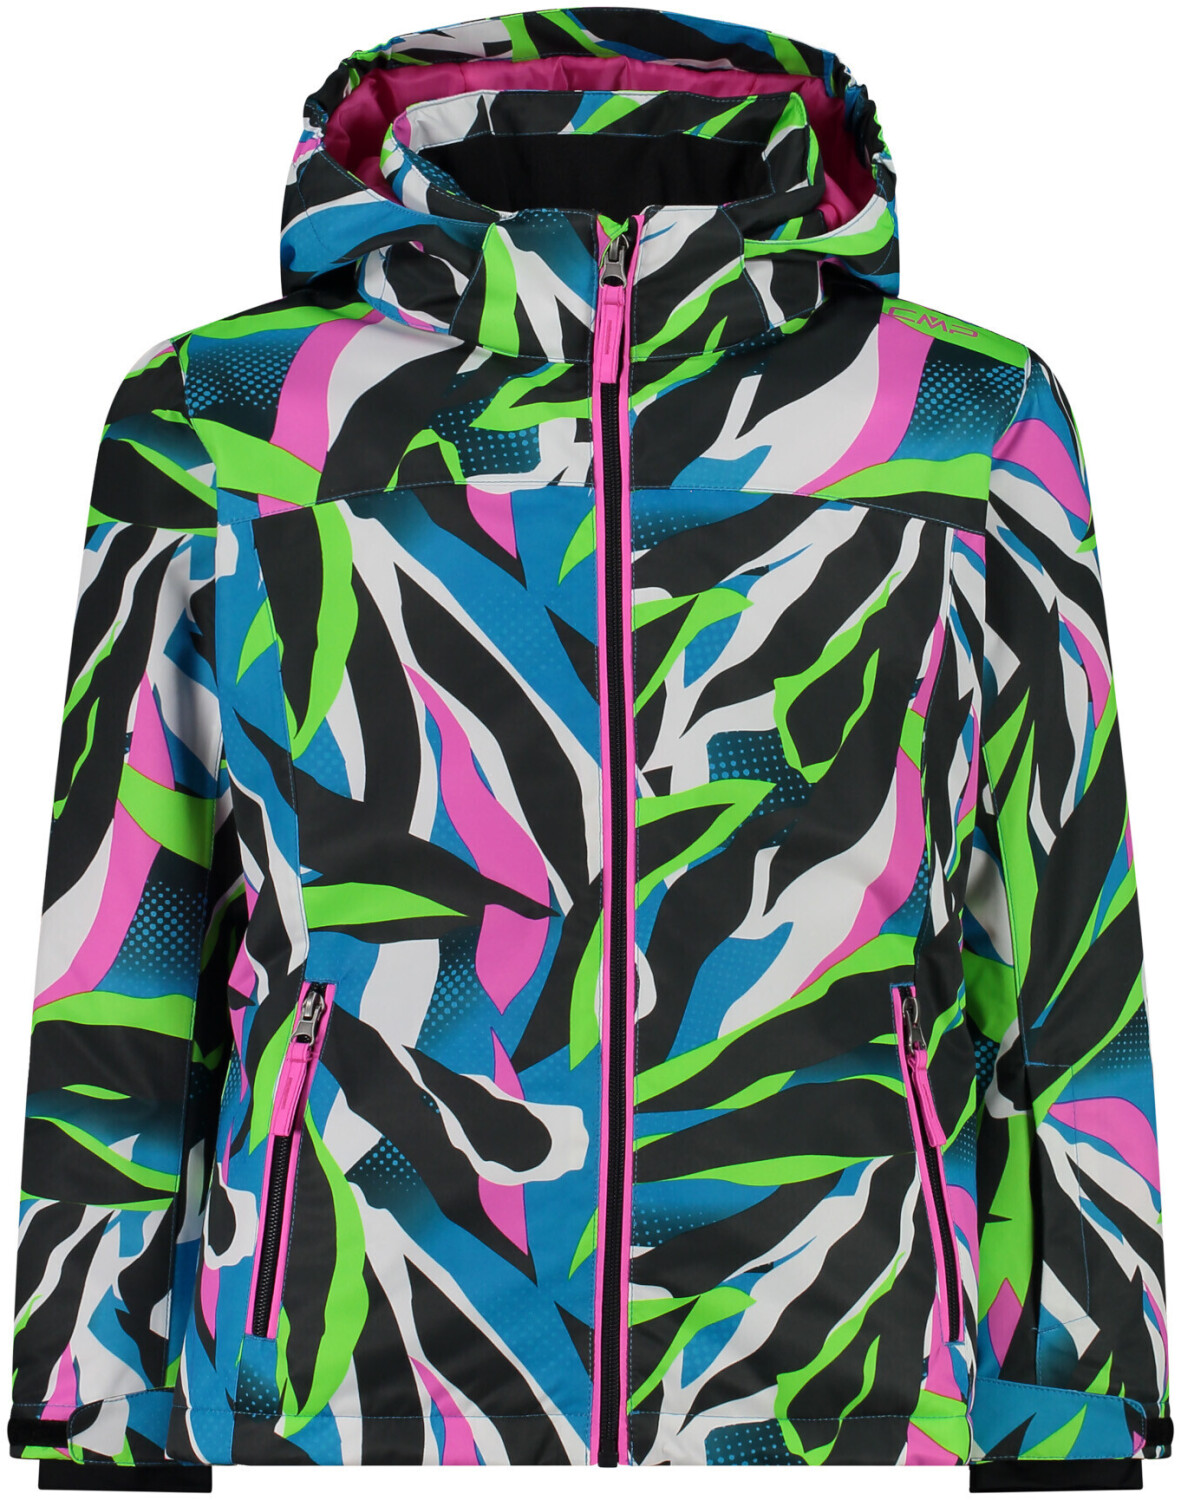 Buy CMP Girl from Snaps Jacket £30.99 purple (Today) – on fluo/turchese Deals (39W2085) Best